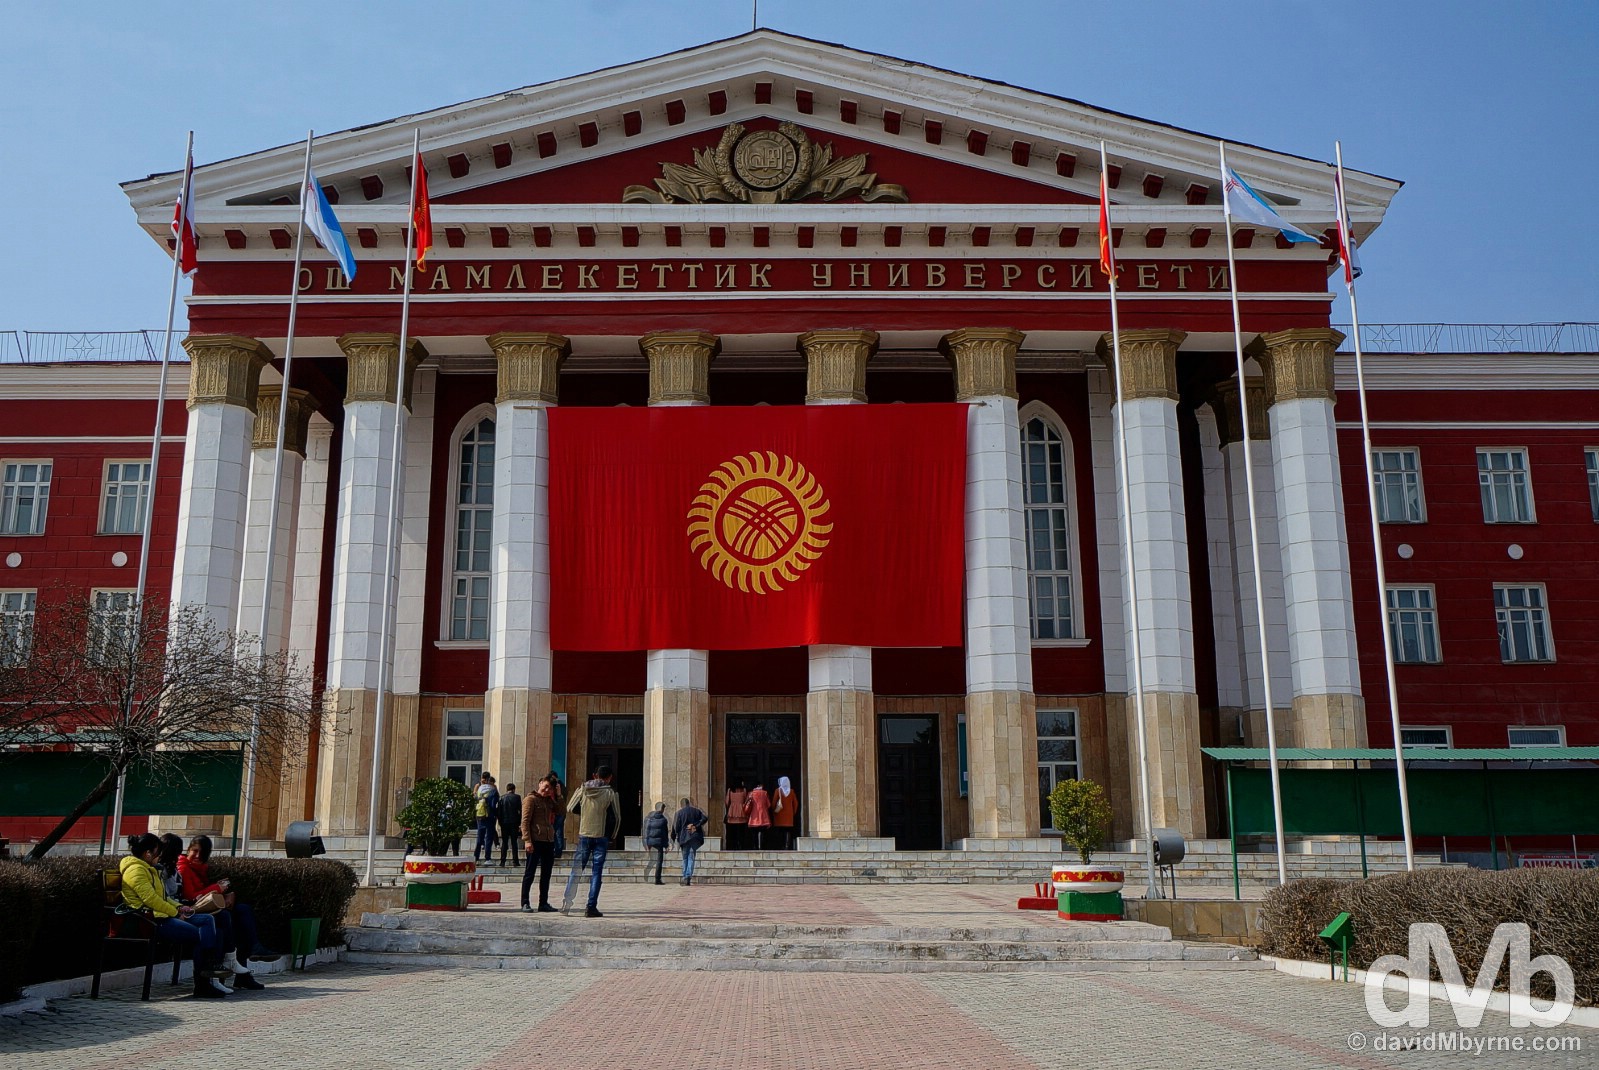 University building in Osh, southern Kyrgyzstan. March 3, 2015. 